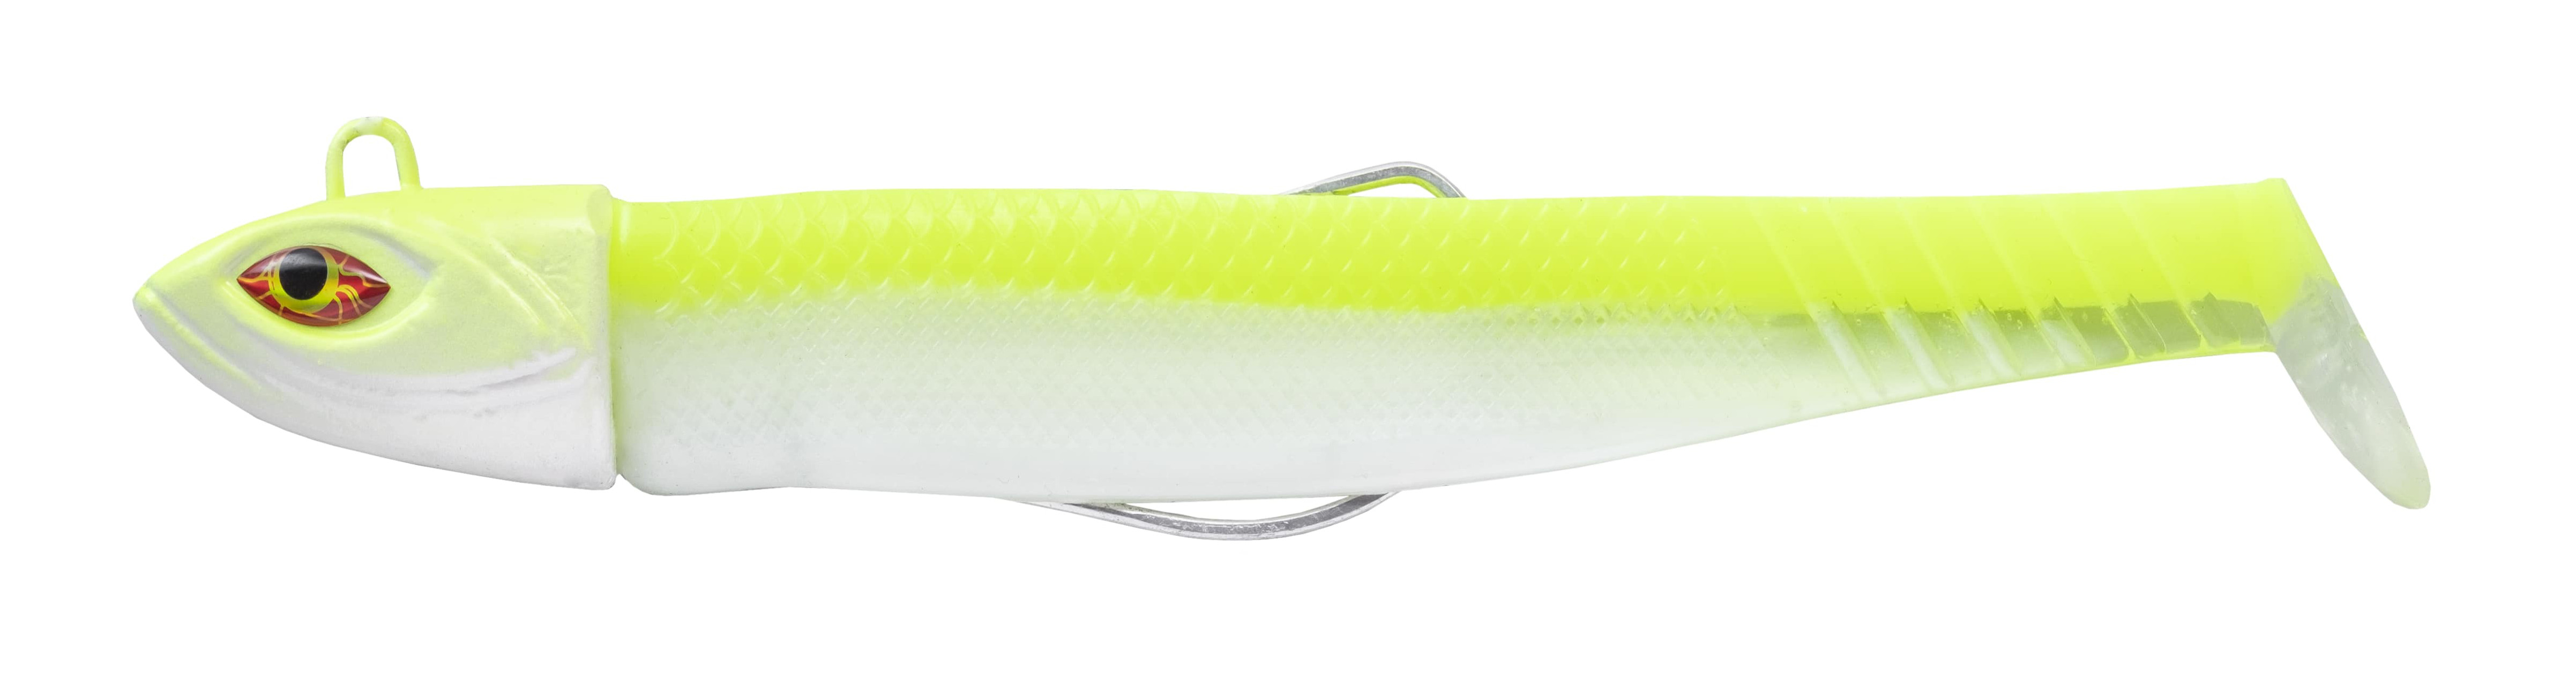 Cinnetic Crafty Candy Shad 10.5cm (25g) (2 pieces) - White Chartreuse